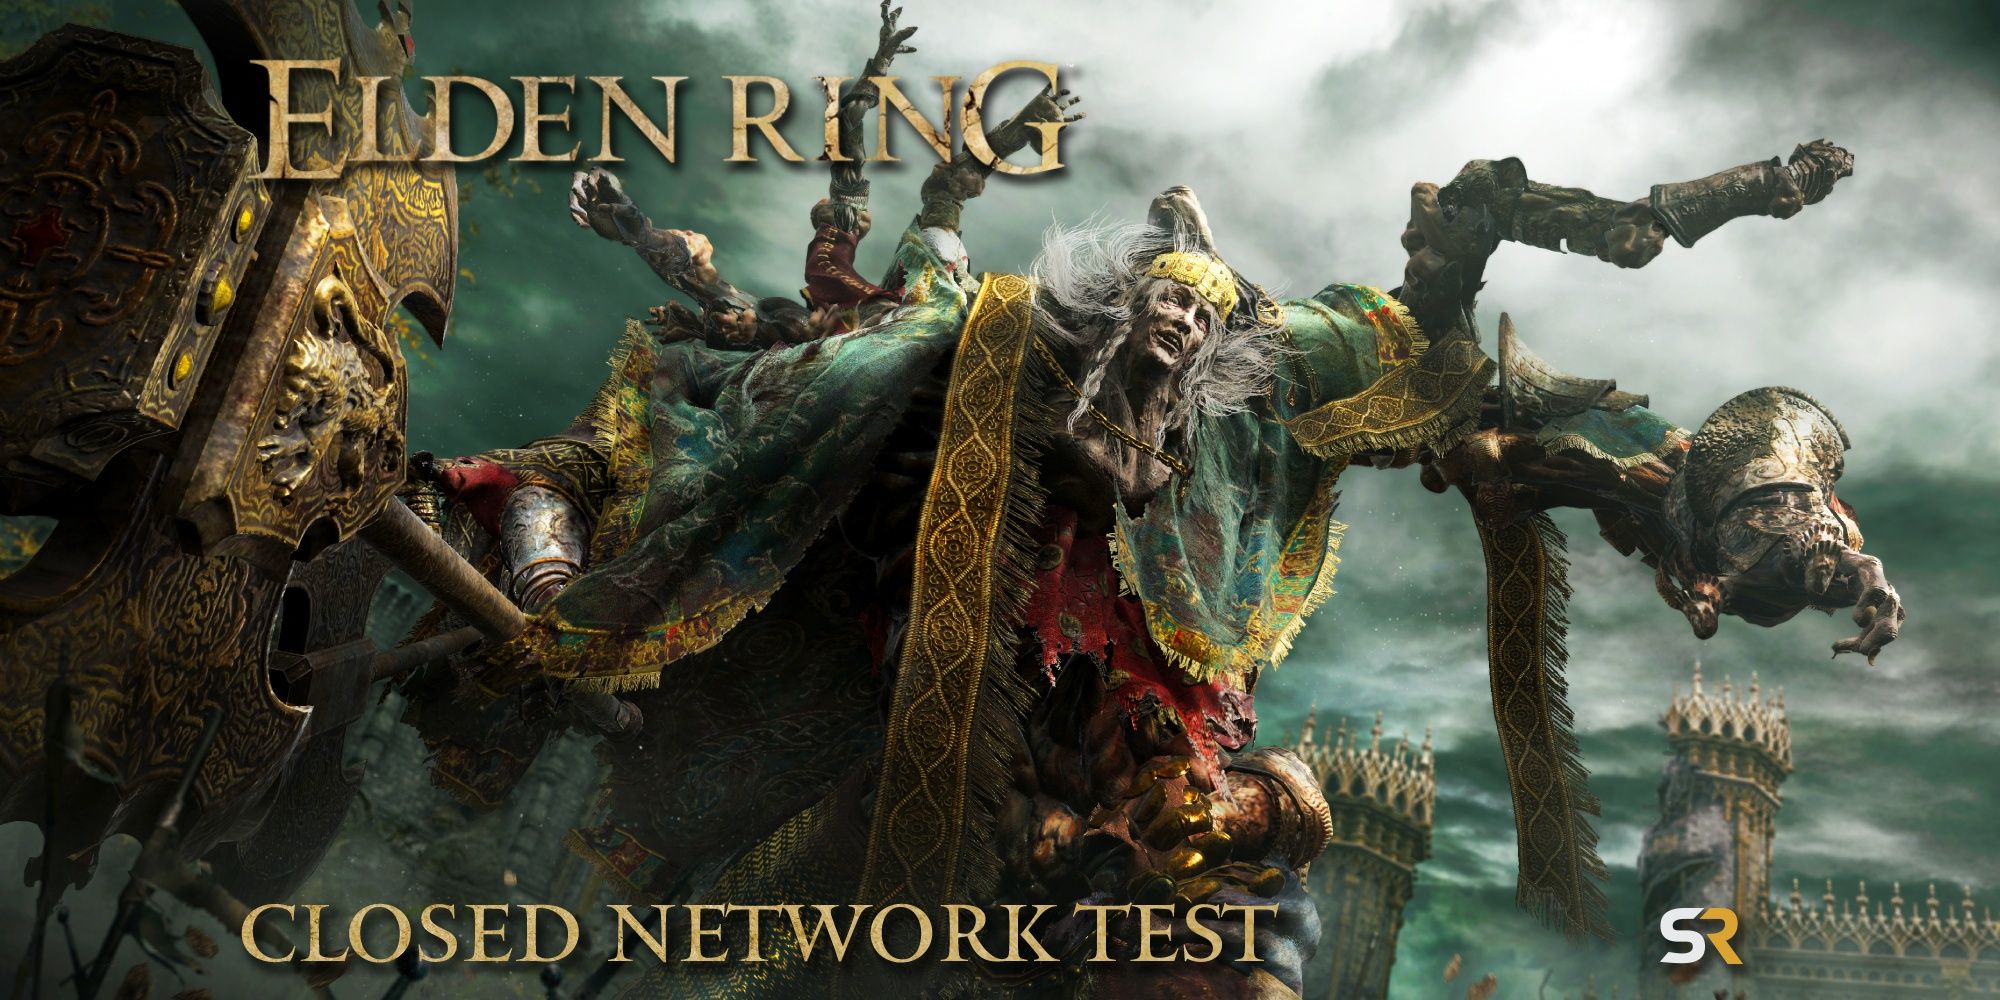 Elden Ring Closed Network Test Guide (Dates Times & How to Sign Up)